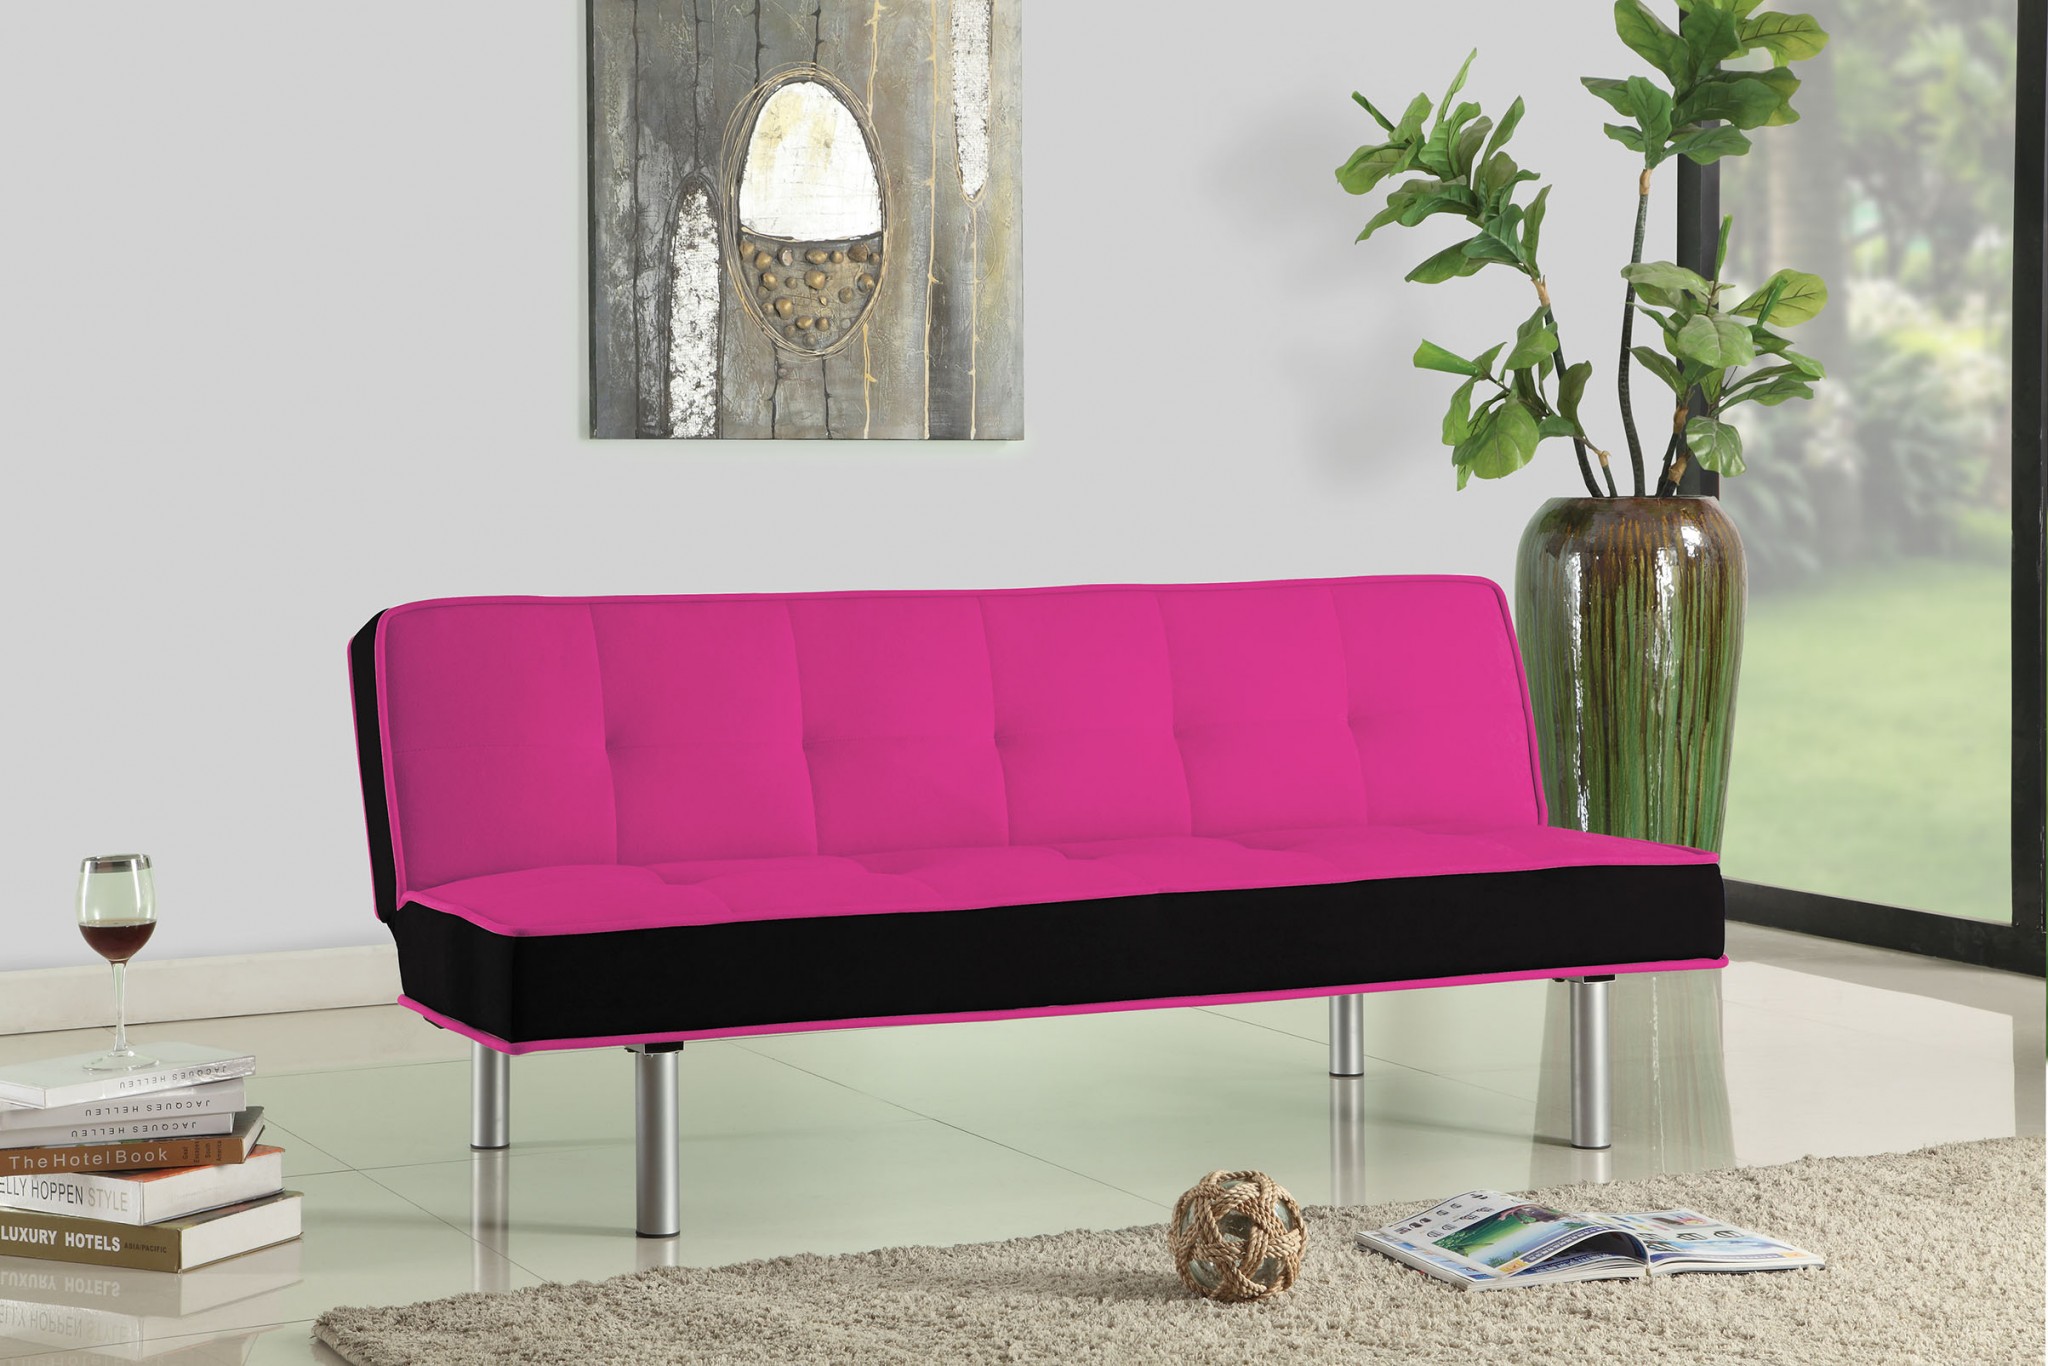 66" X 18" X 29" Magenta And Black Flannel Adjustable Couch